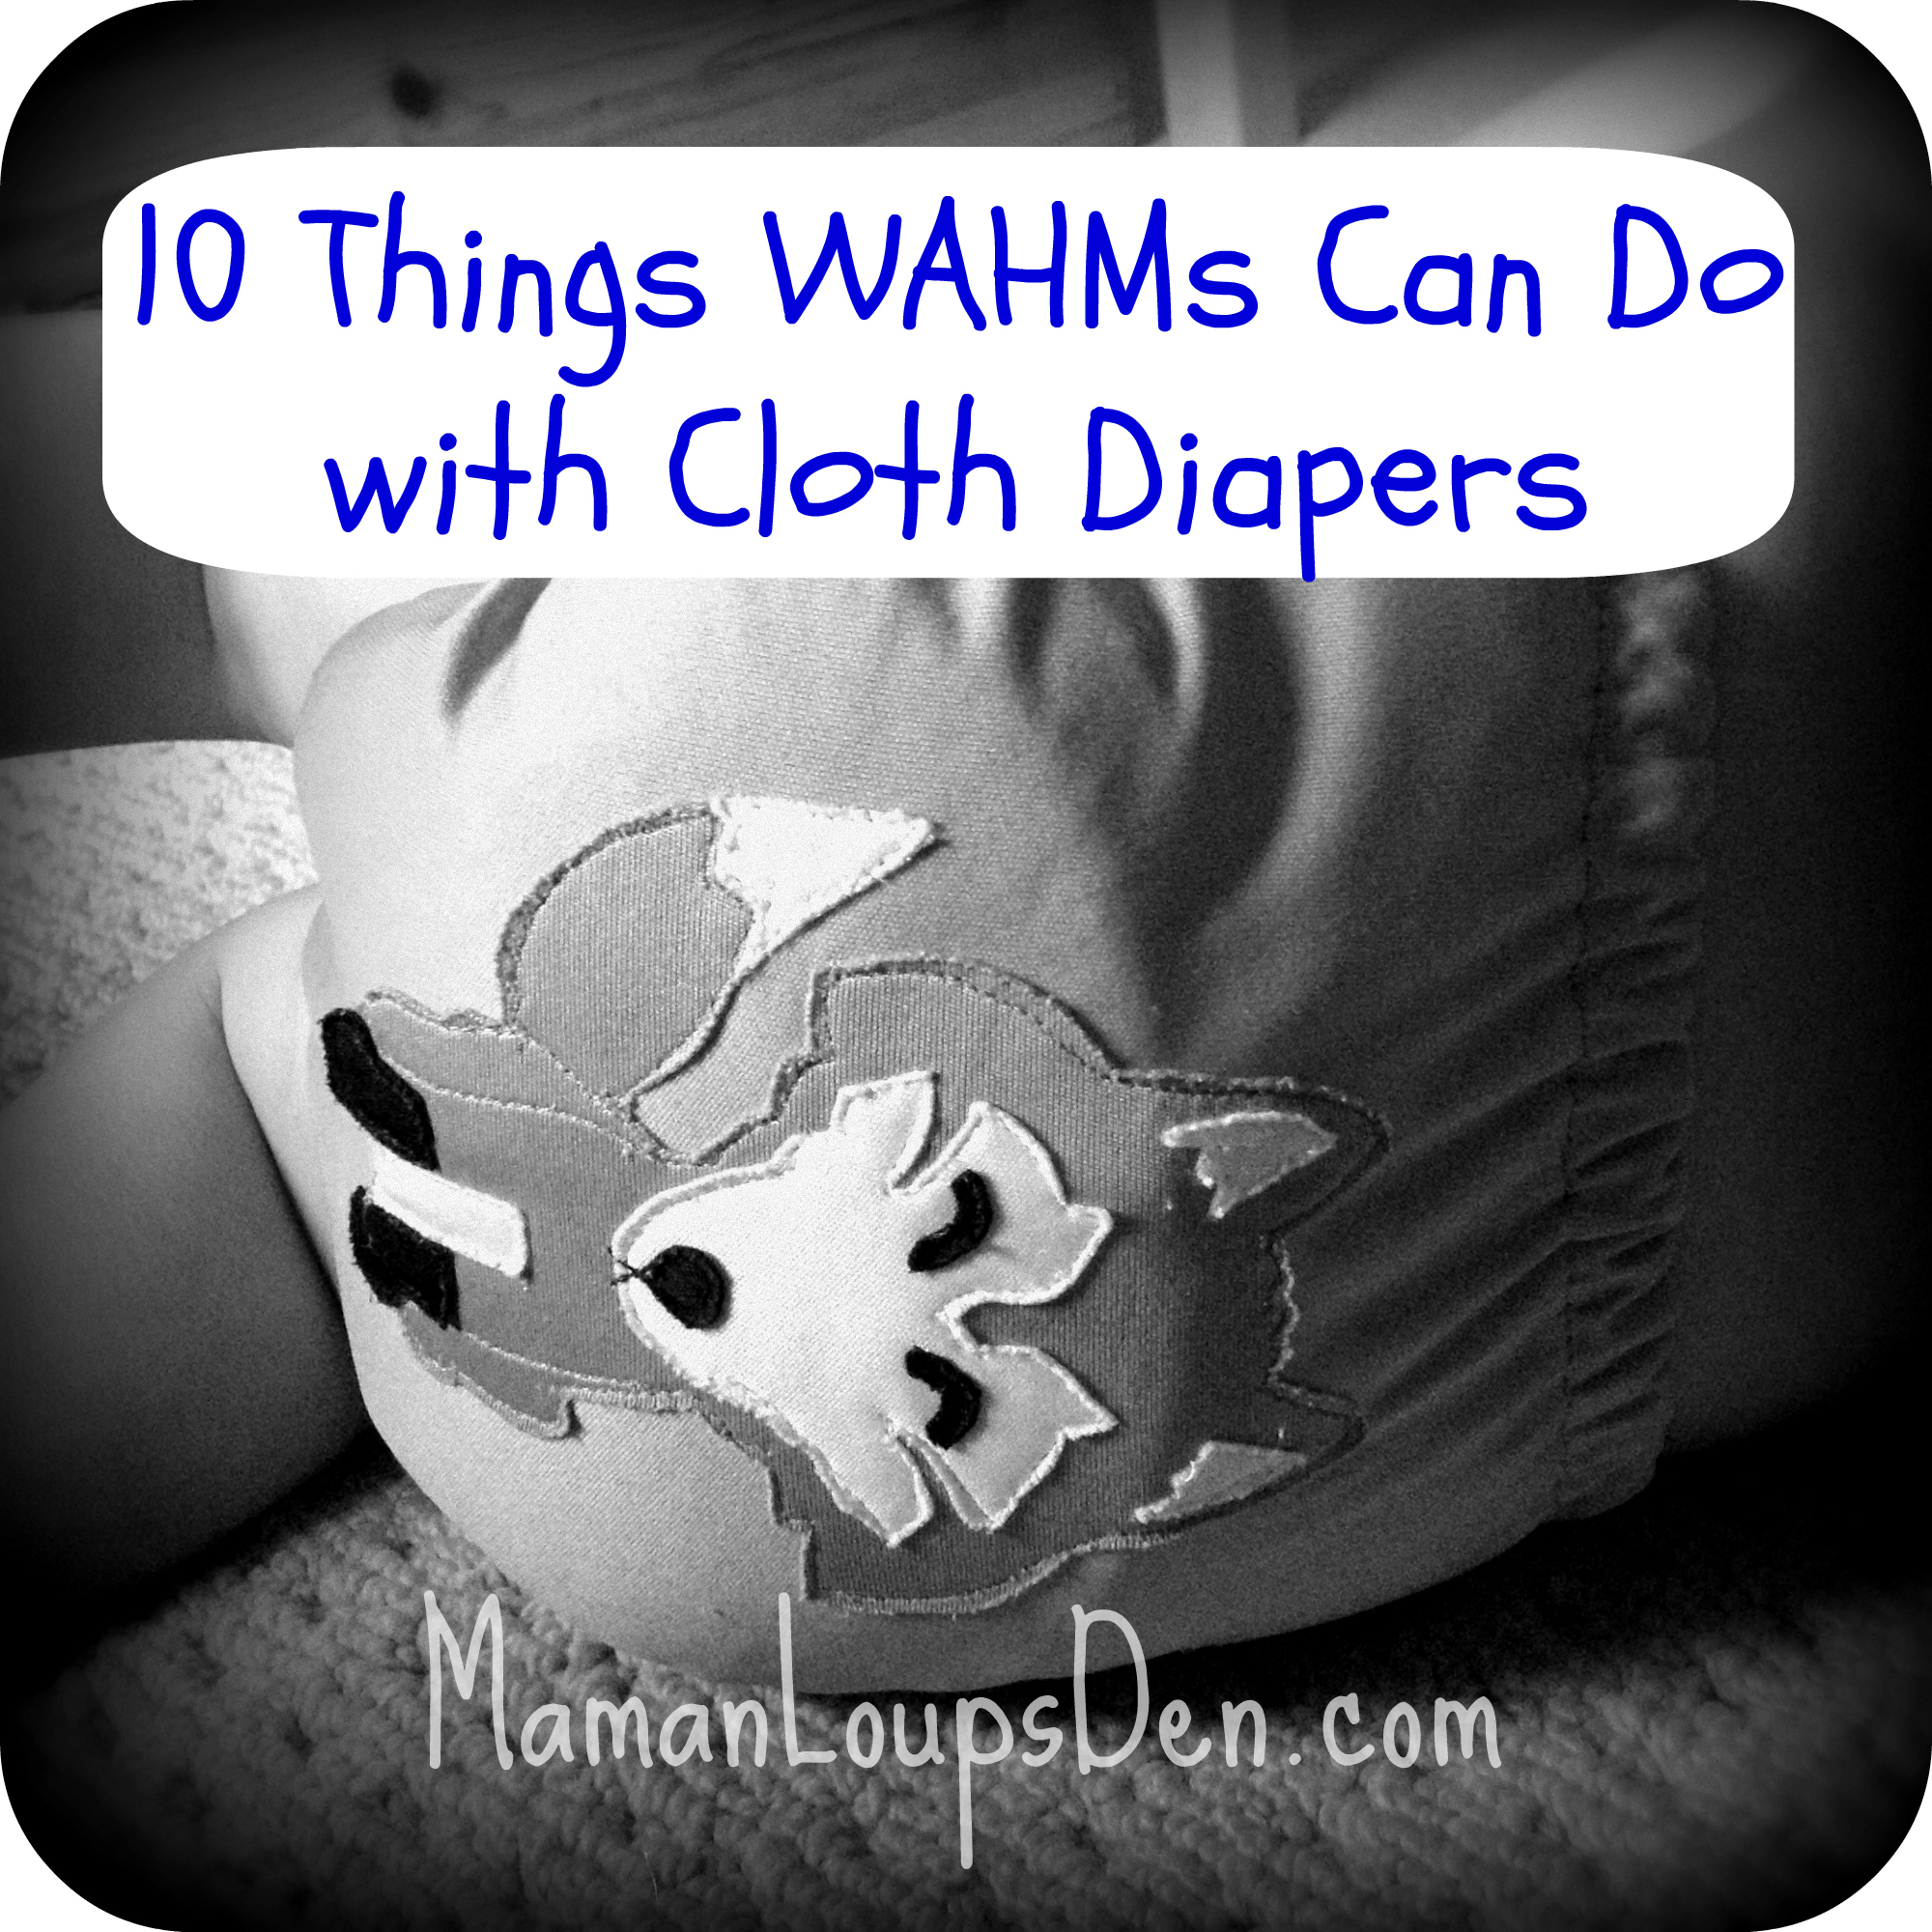 10 Things WAHMs Can Do with Cloth Diapers